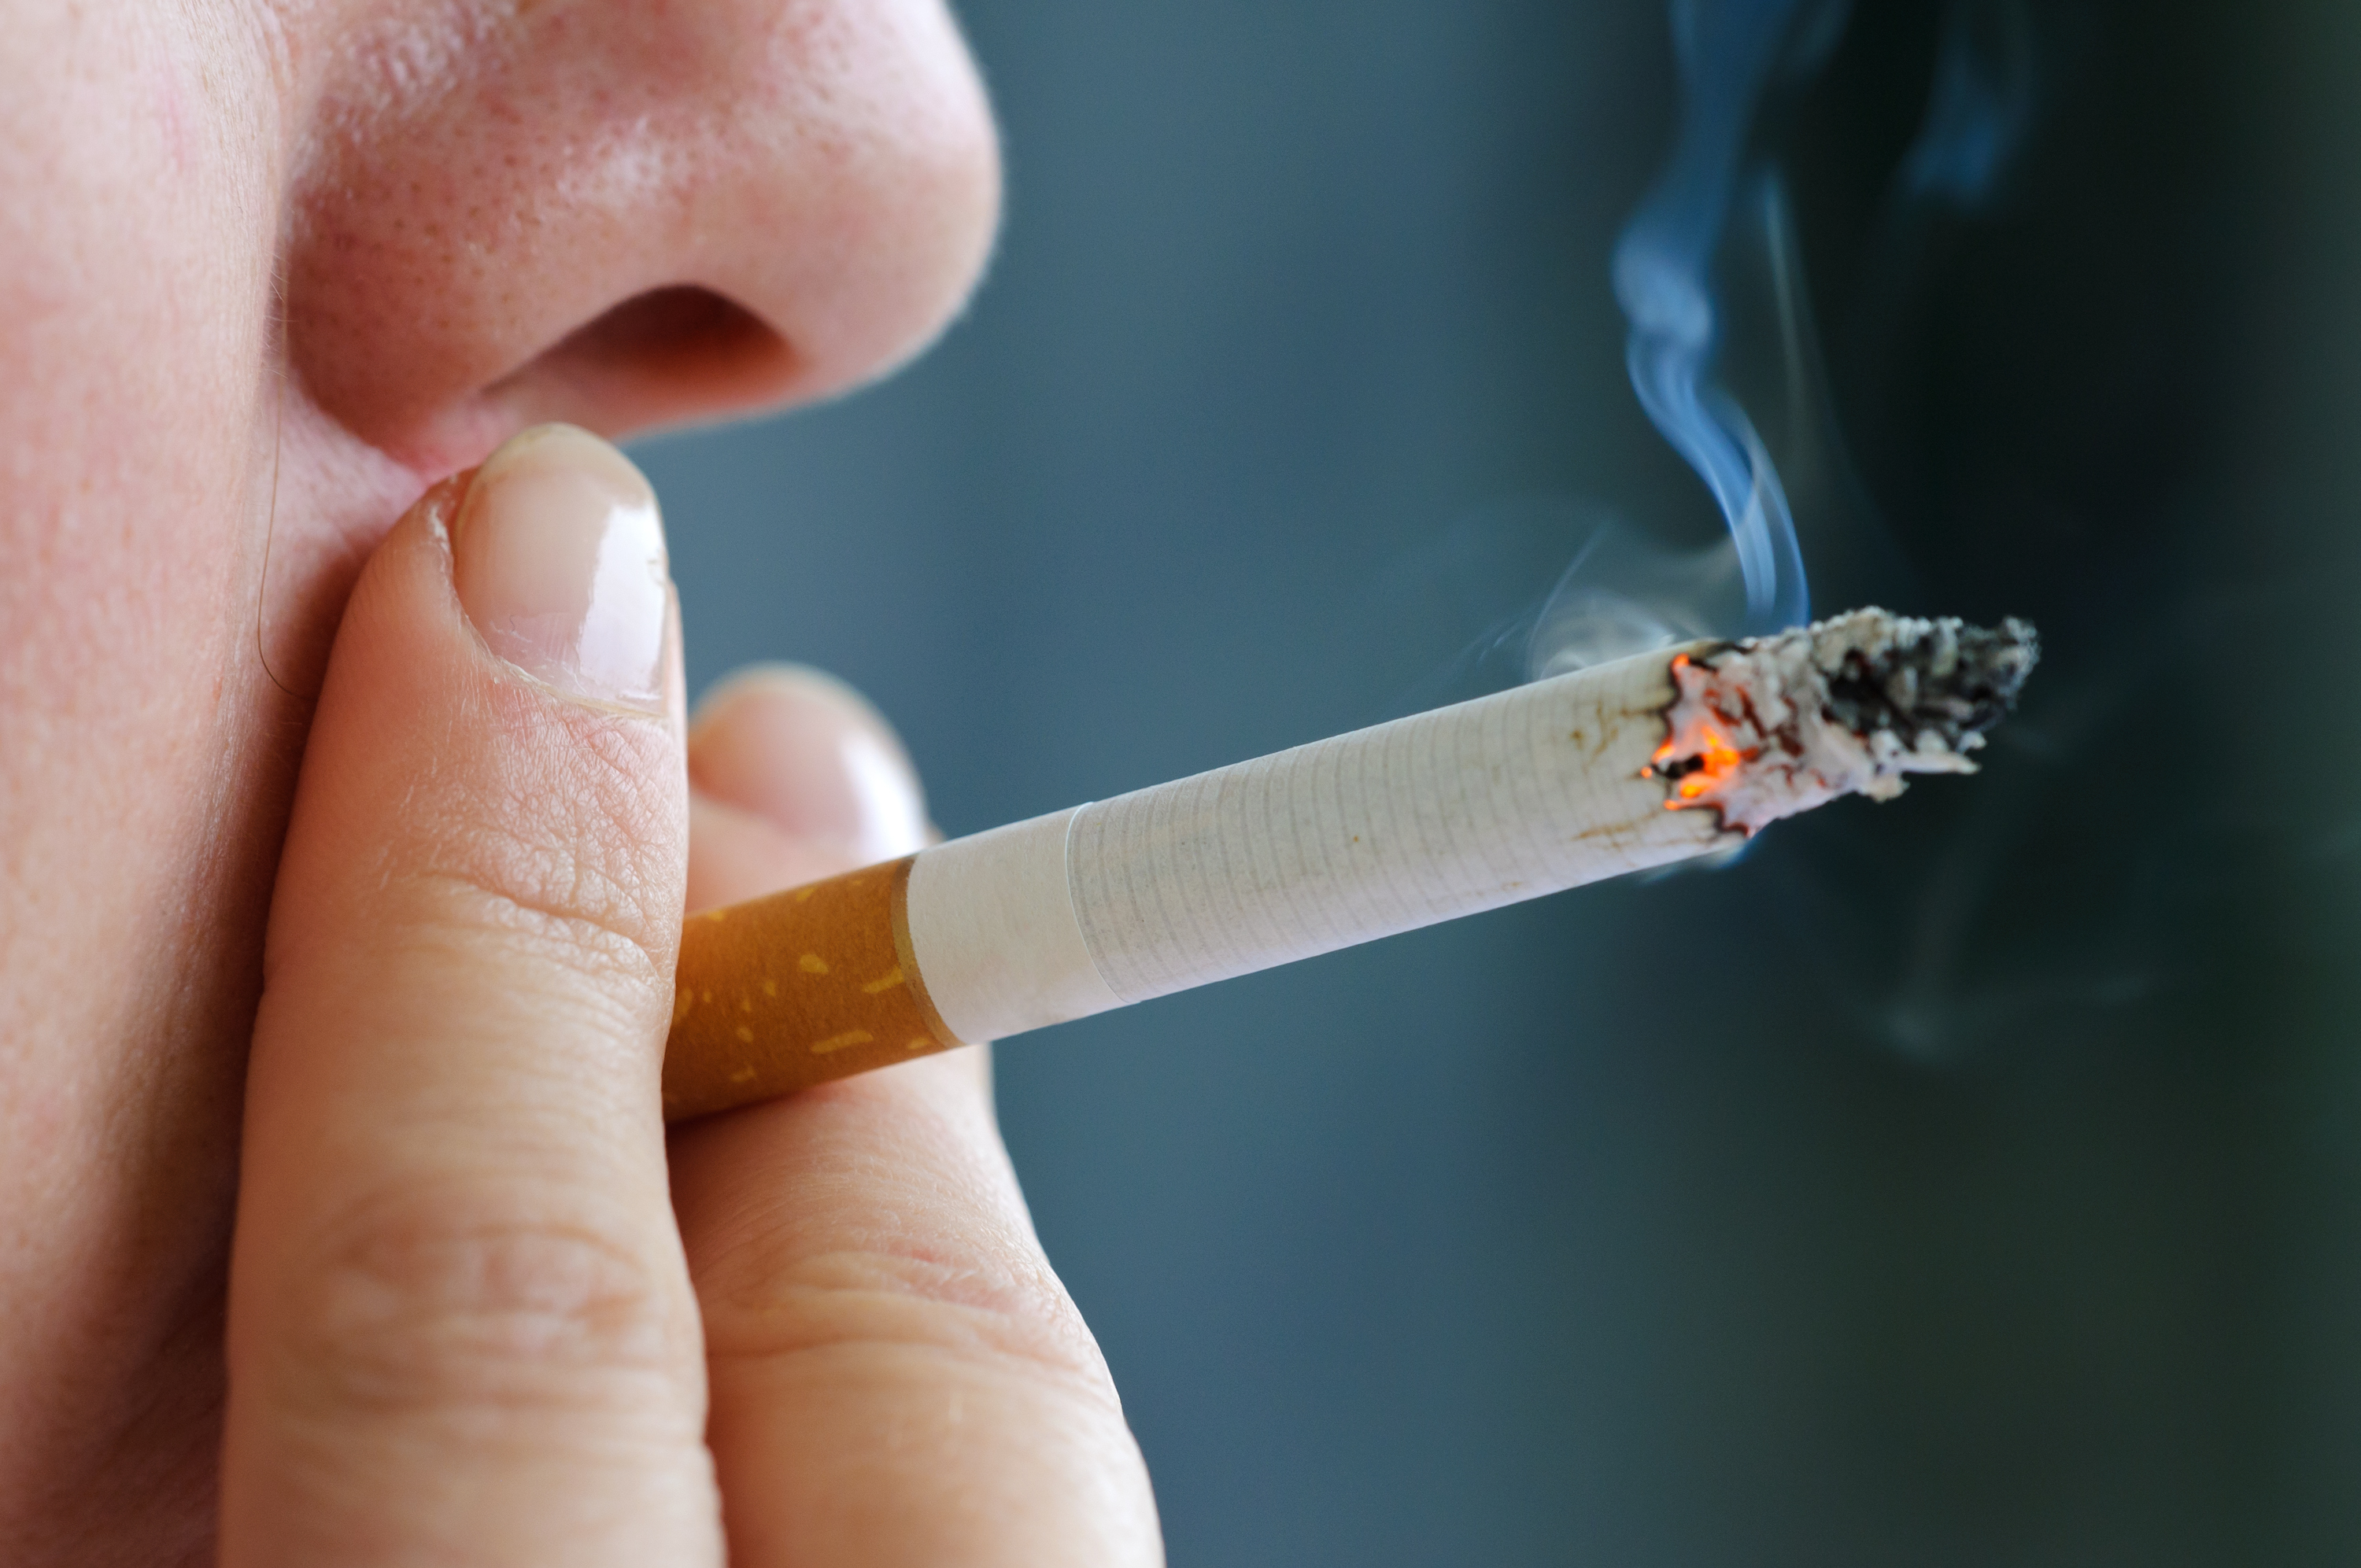 Close-up of a person smoking a lit cigarette, with smoke rising from the tip